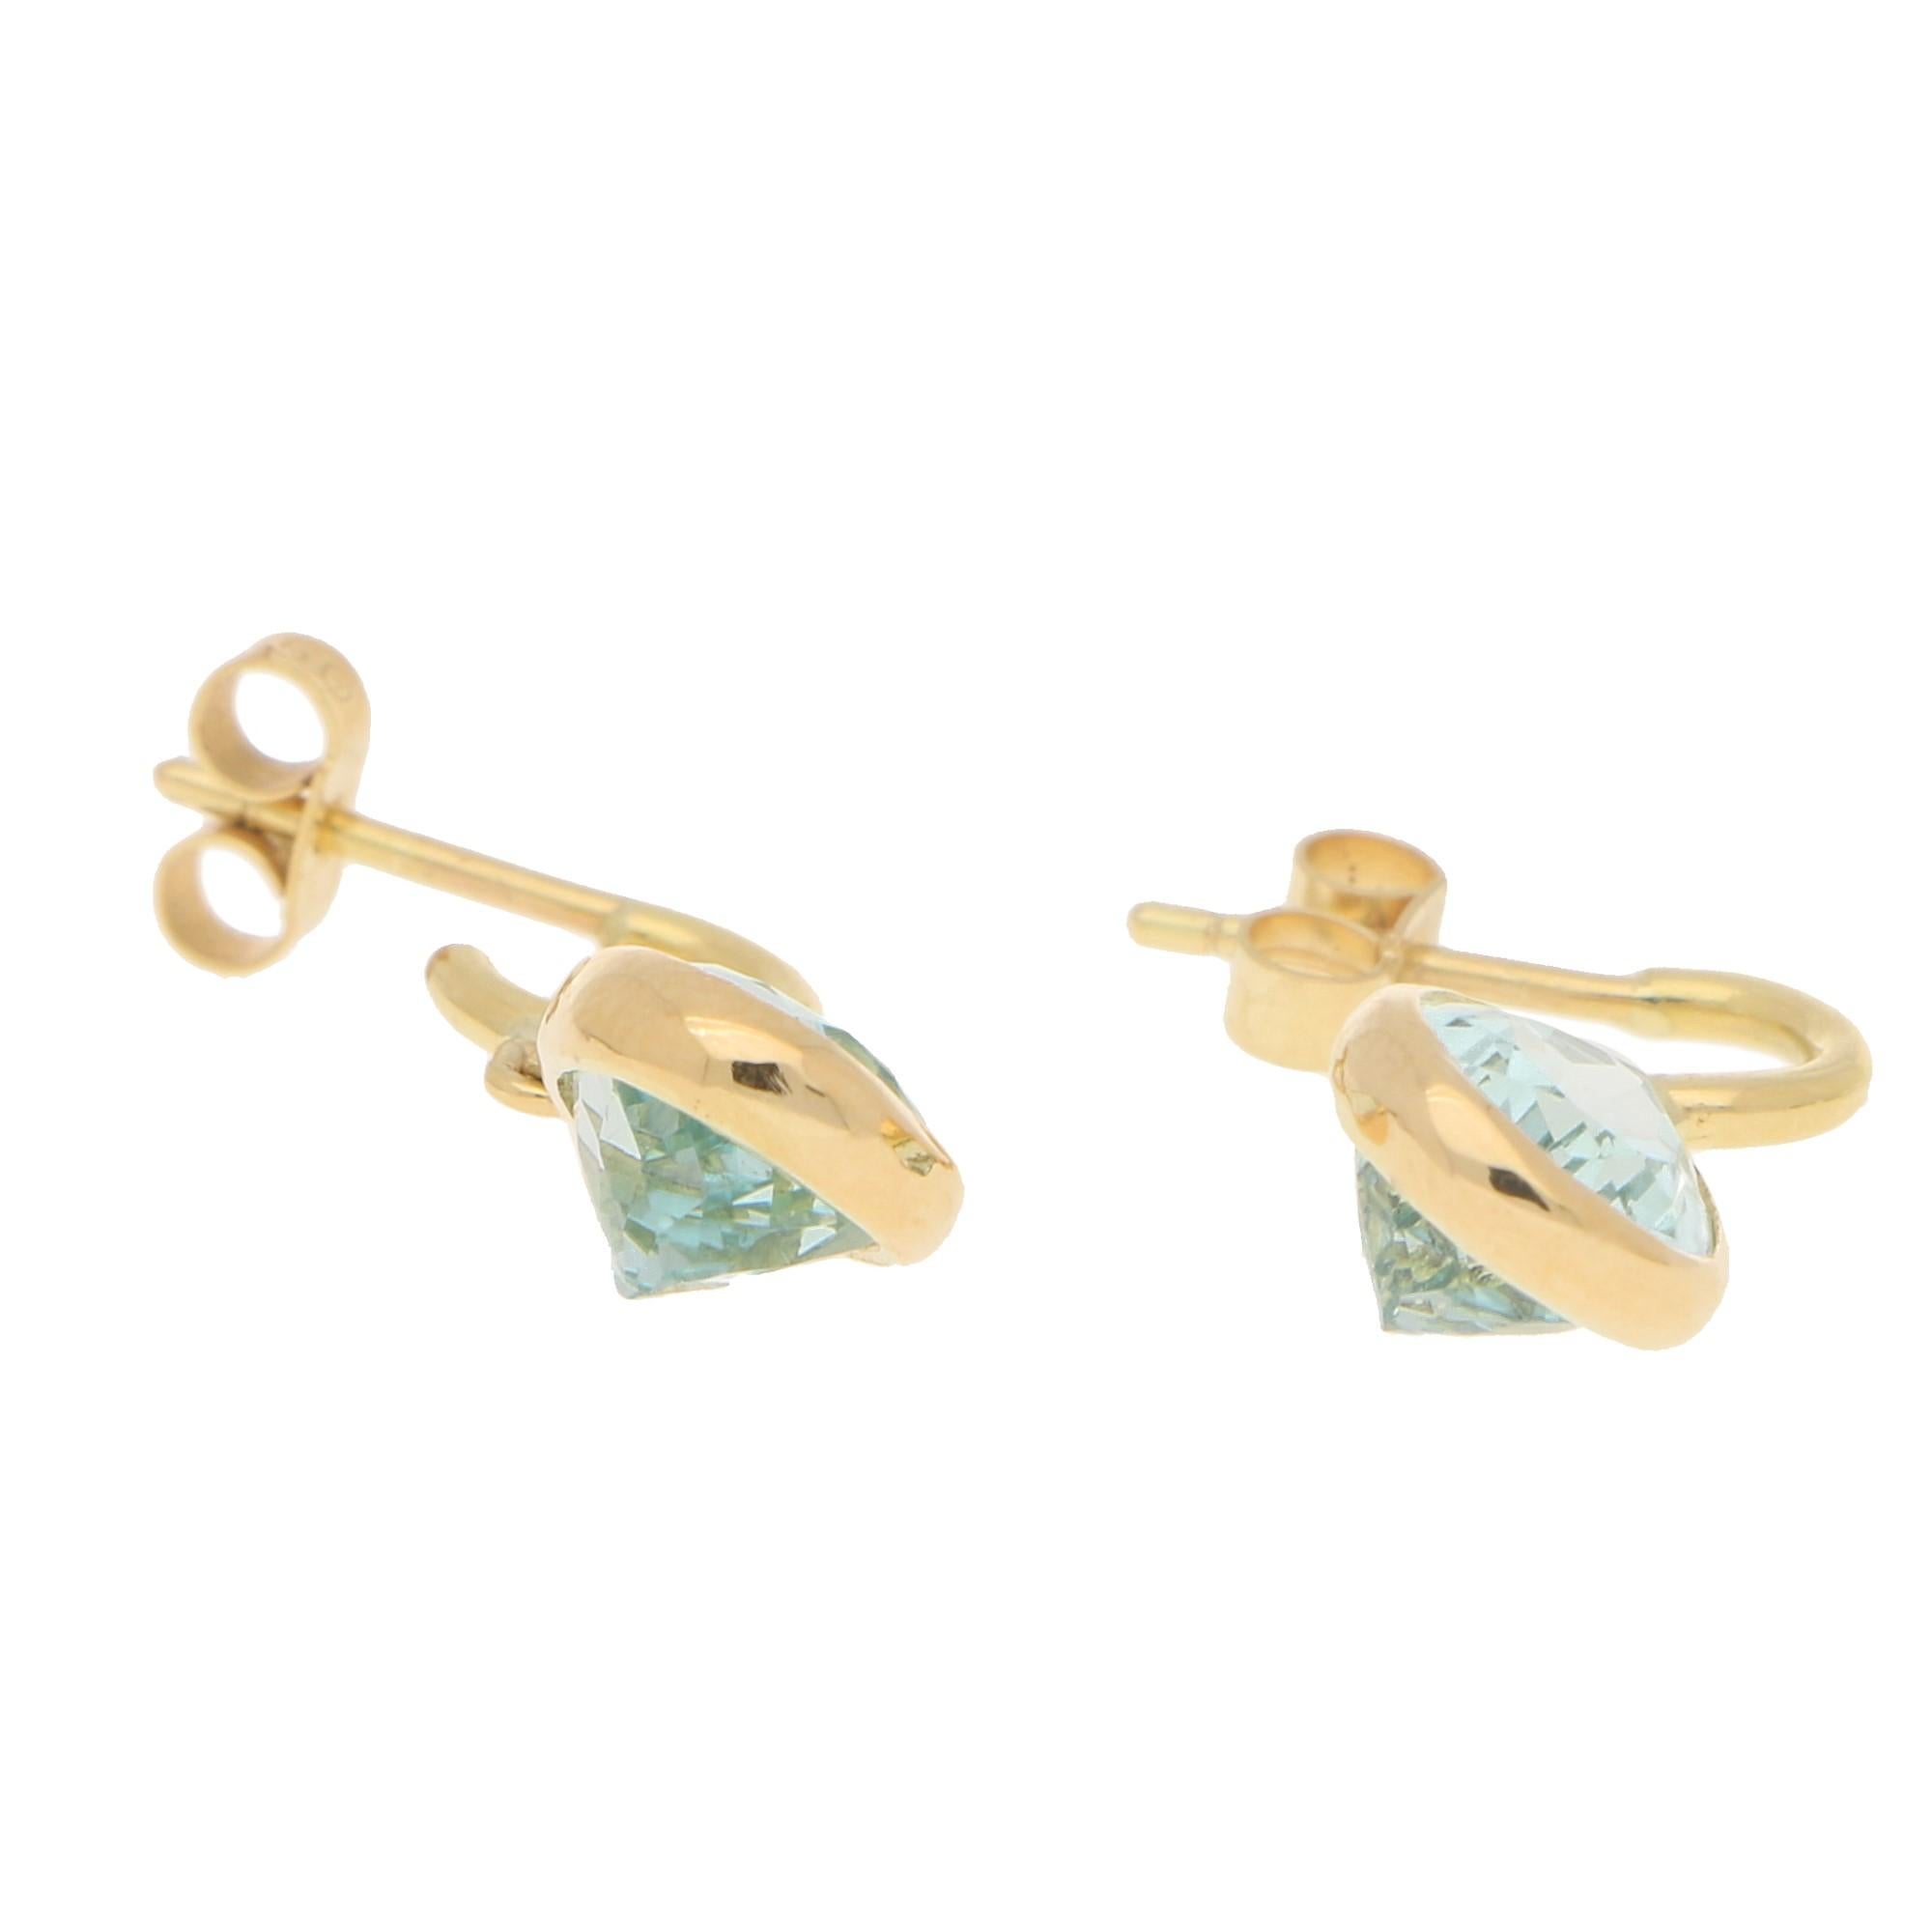 A lovely pair of pear-shaped aquamarine half hoop earrings set in 18k yellow gold. Each earring features a singular aquamarine encased in a 18k yellow gold rubover setting. The stones are then attached to a simple solid half hoop earring which have